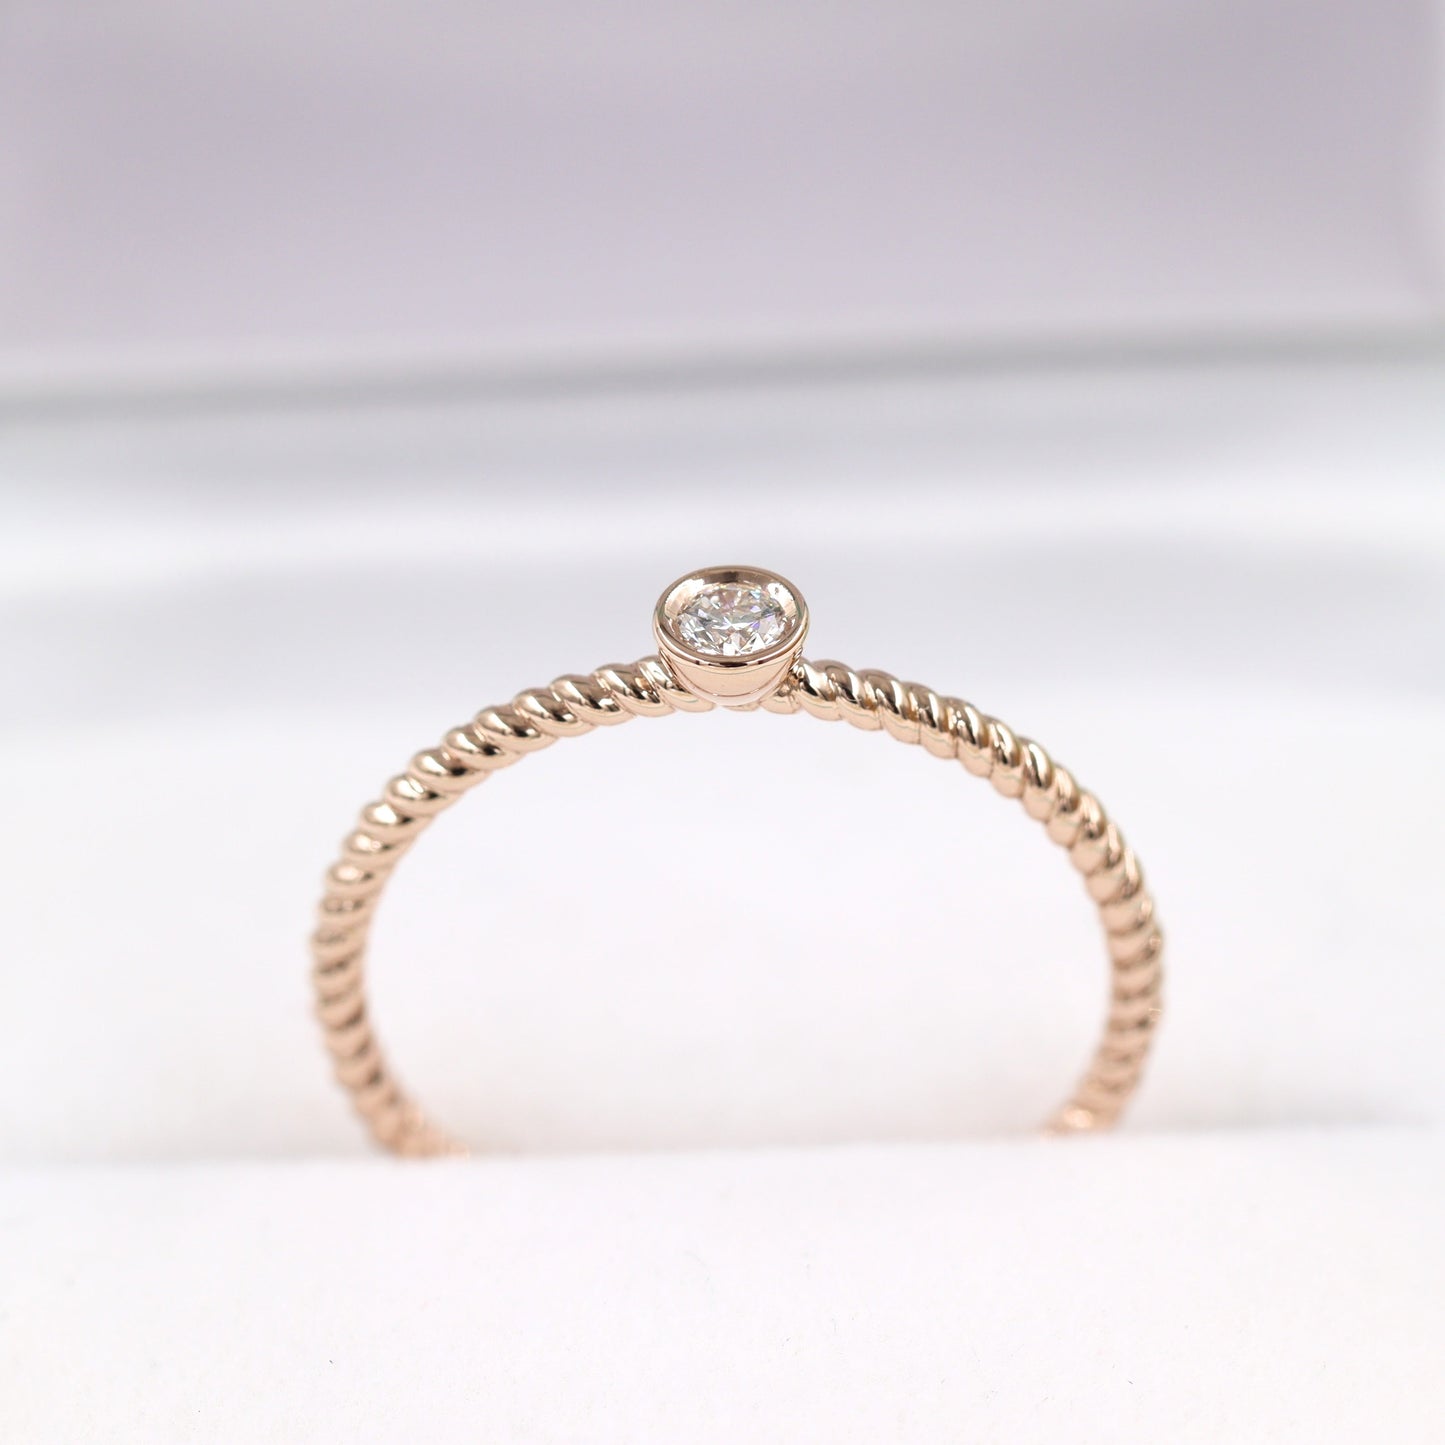 Single .07ct Diamond Wedding Ring/14K Gold Natural Diamond Ring/Simple Engagement Ring / Stackable Round Bezel Band/Twist Dainty Ring/Gift for her